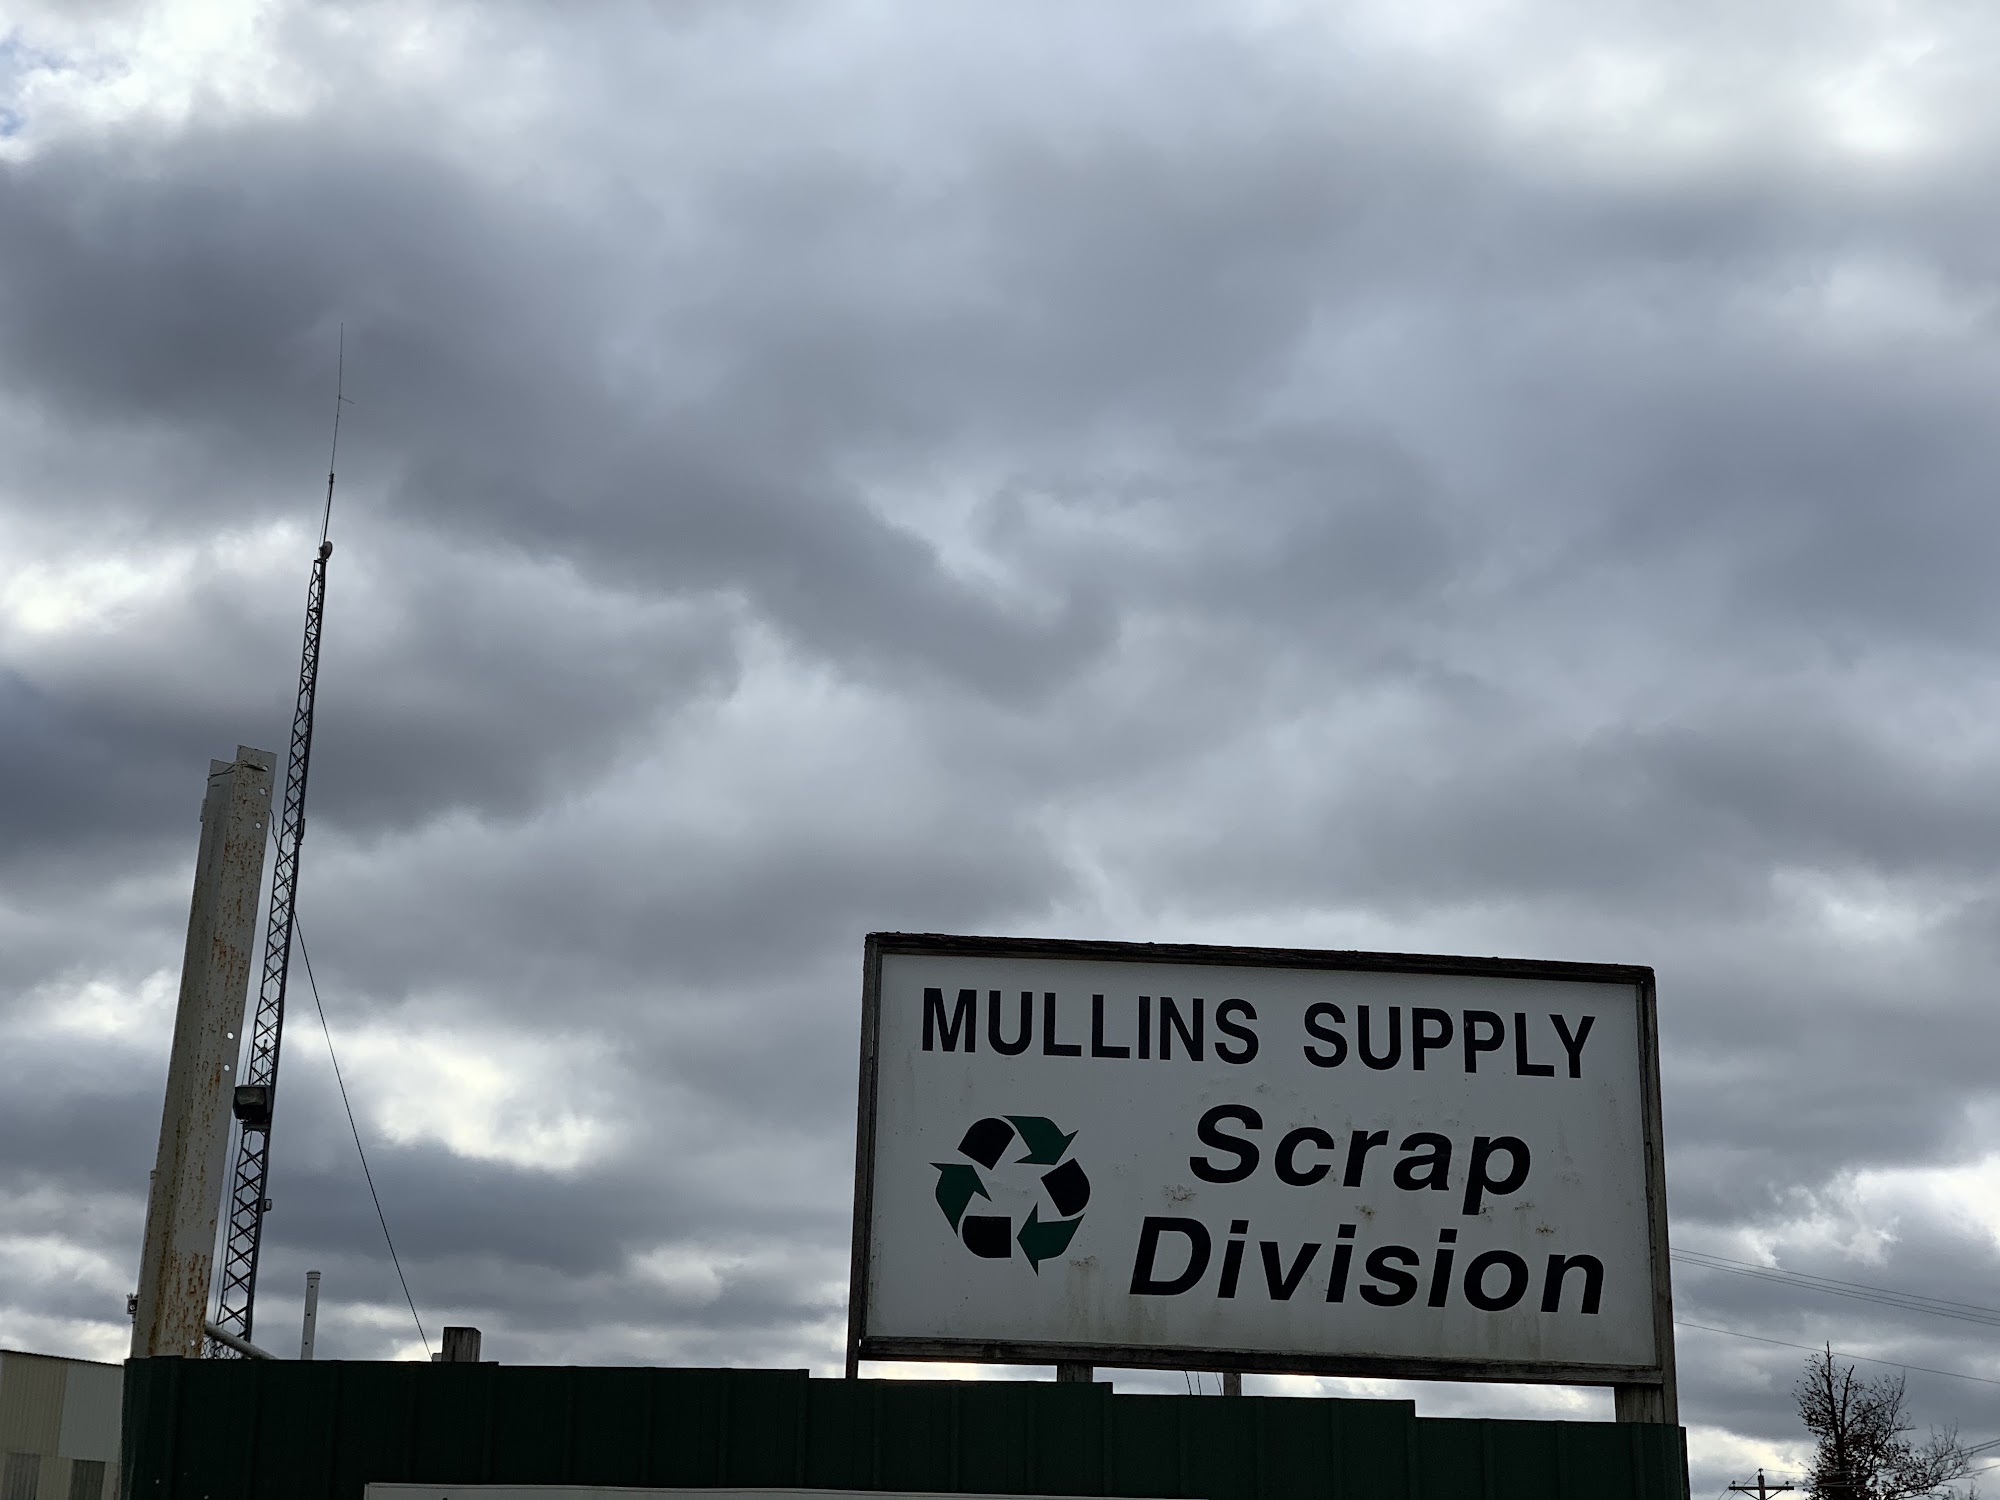 Mullins Supply Inc 9292 N Pine Bluff Rd, Bicknell Indiana 47512